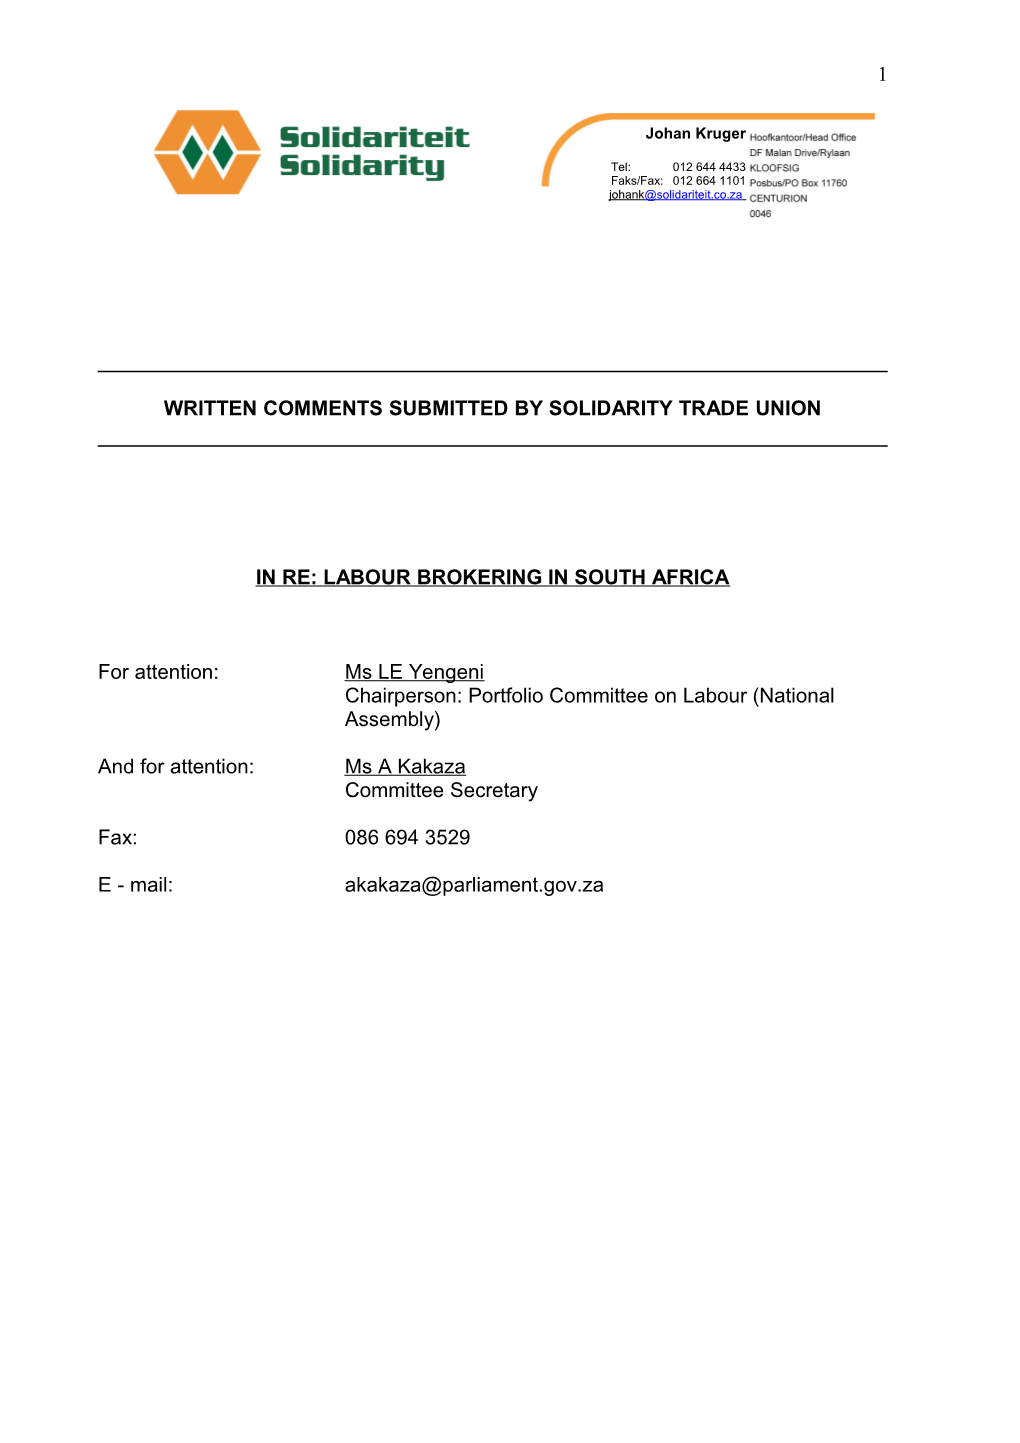 Written Comments Submitted by Solidarity Trade Union